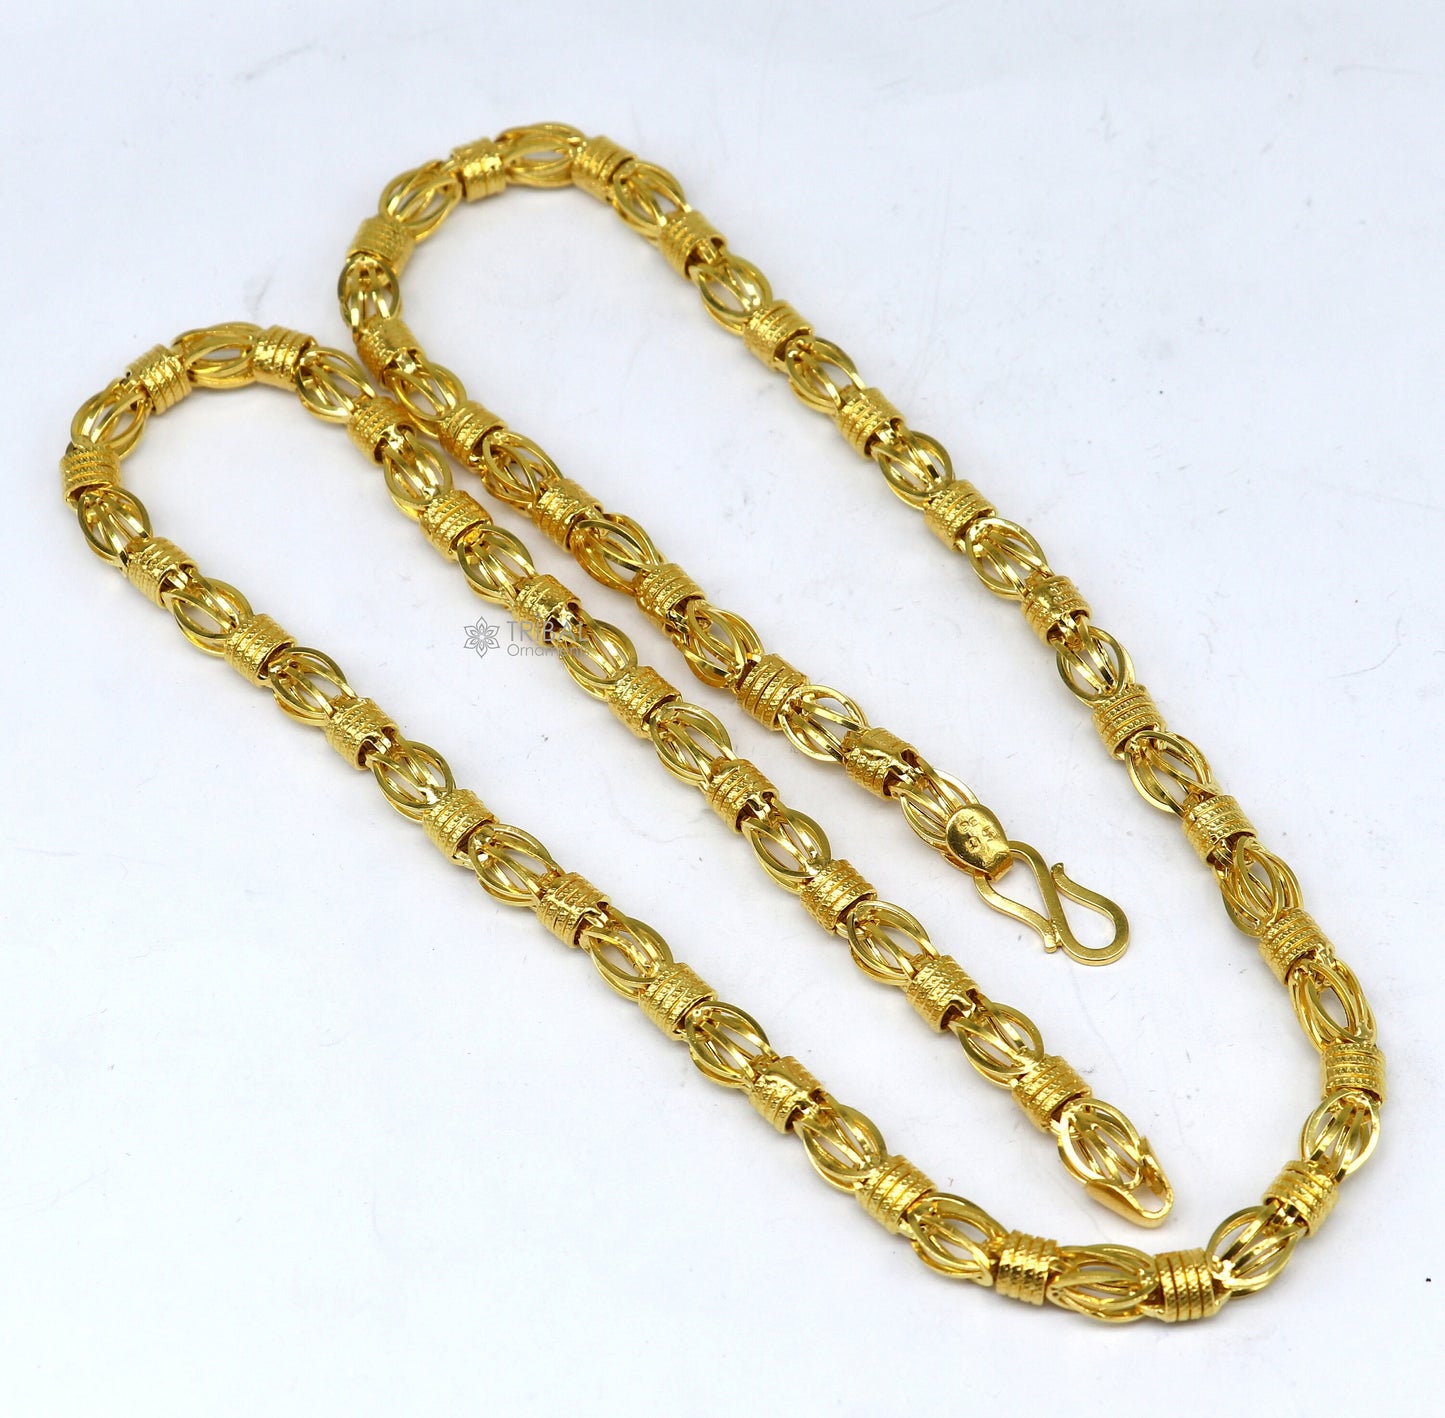 22kt yellow gold royal Handmade unique byzantine chain, fabulous customized men's chain, men's functional gifting chain necklace gch591 - TRIBAL ORNAMENTS